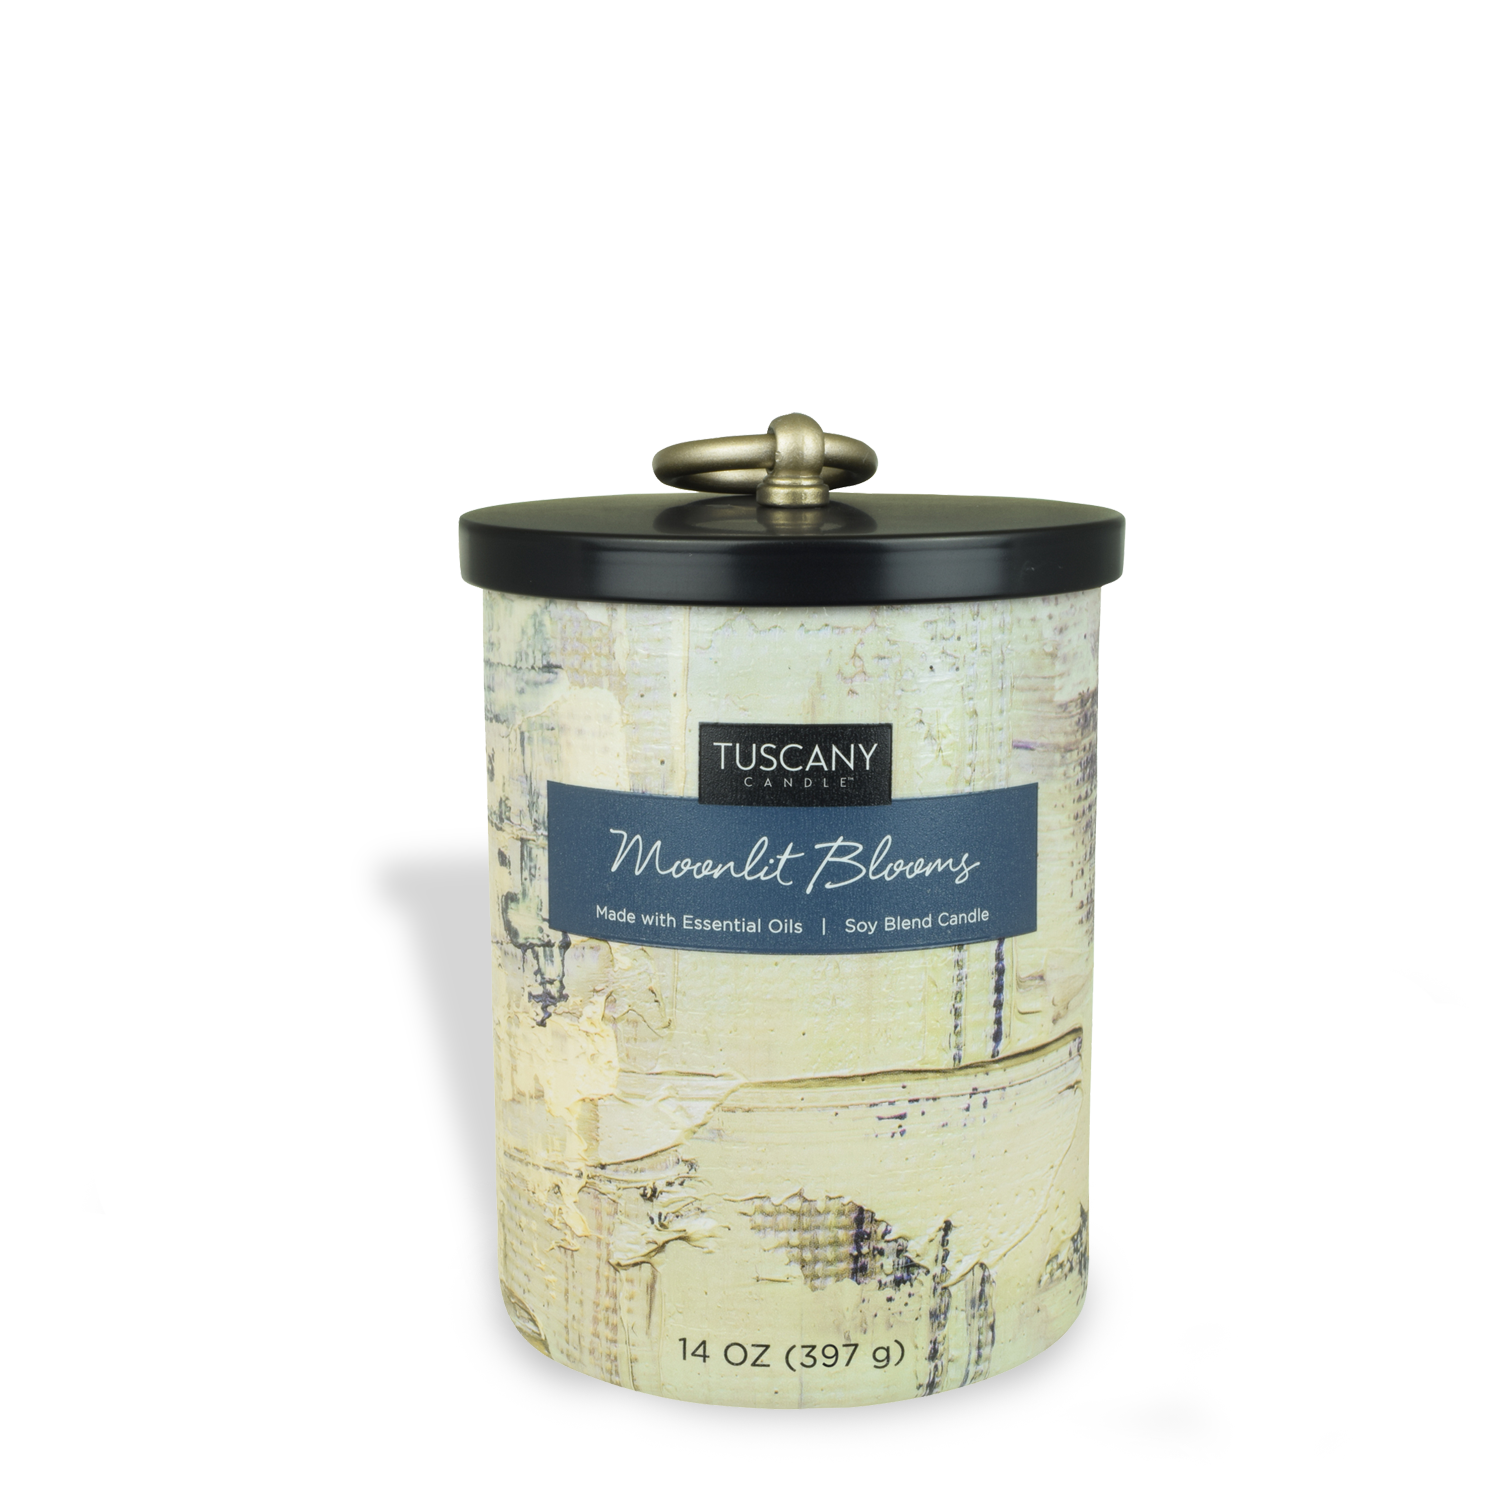 A Tuscany Candle tin container for Moonlit Blooms Scented Jar Candle (14 oz) – Home Décor Collection fragrance storage with a black lid.